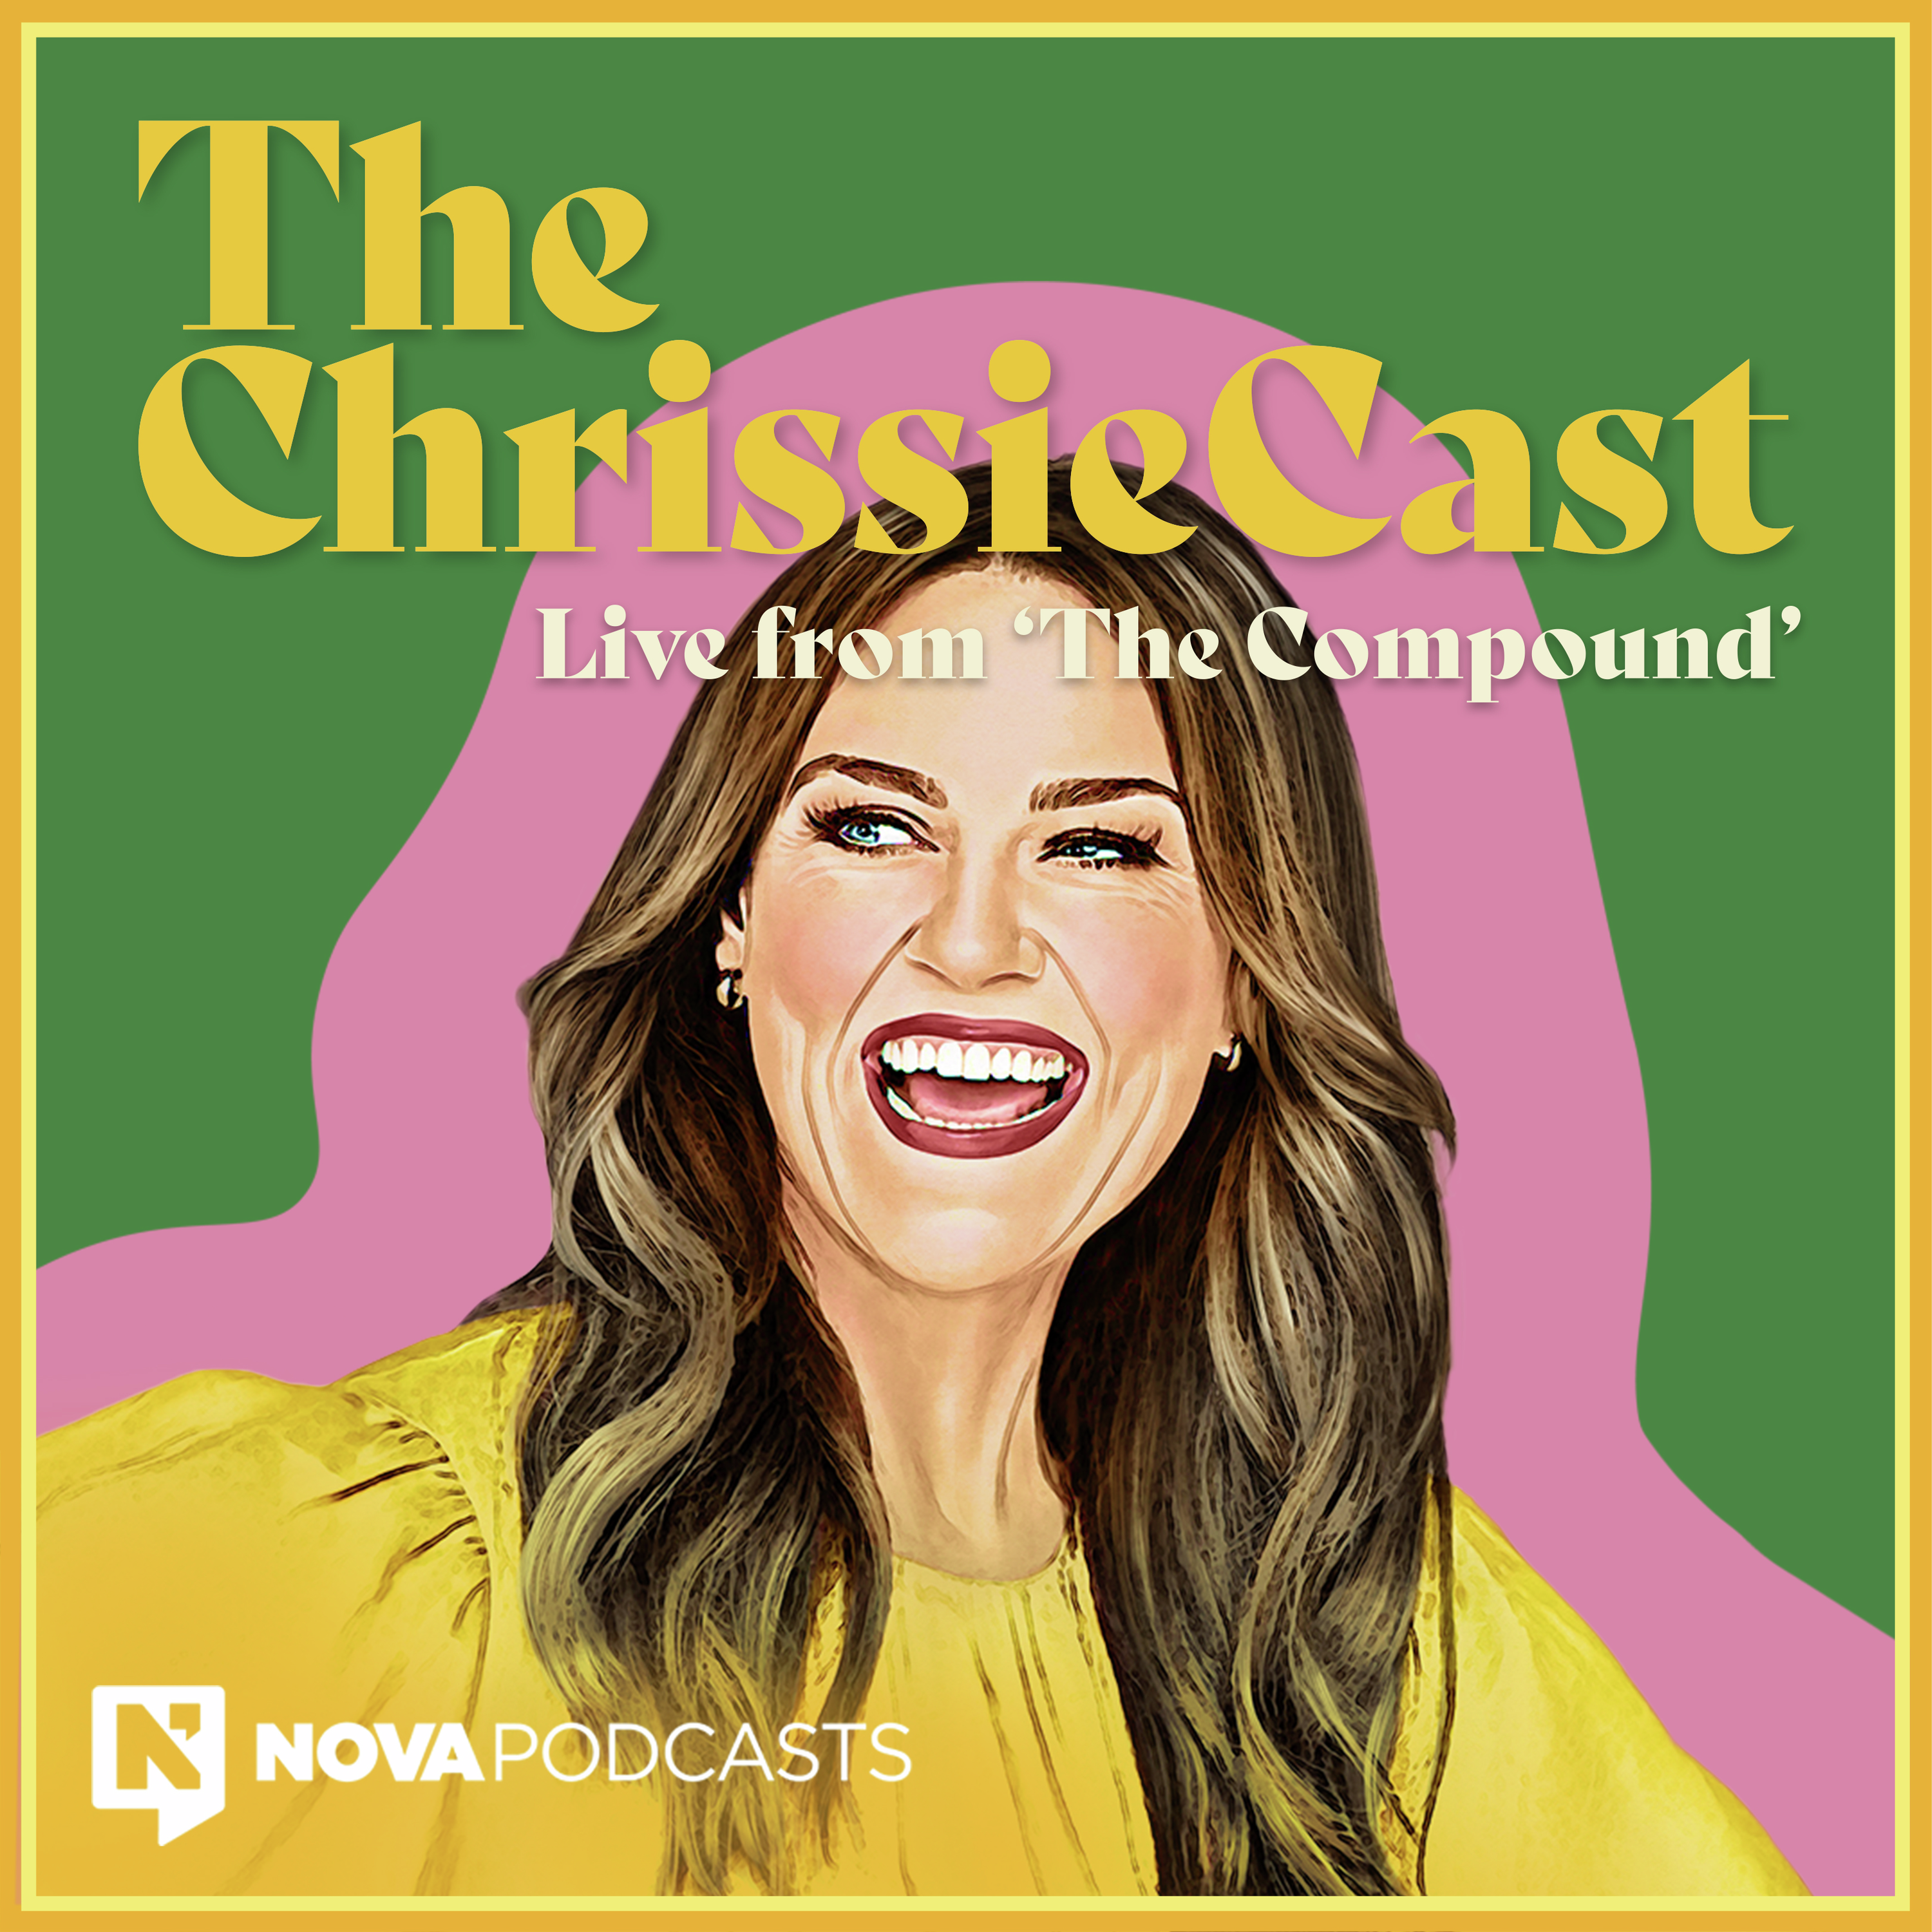 The ChrissieCast: Dave Thornton and Chrissie talk Tater Tots, Americanisms and radio regrets